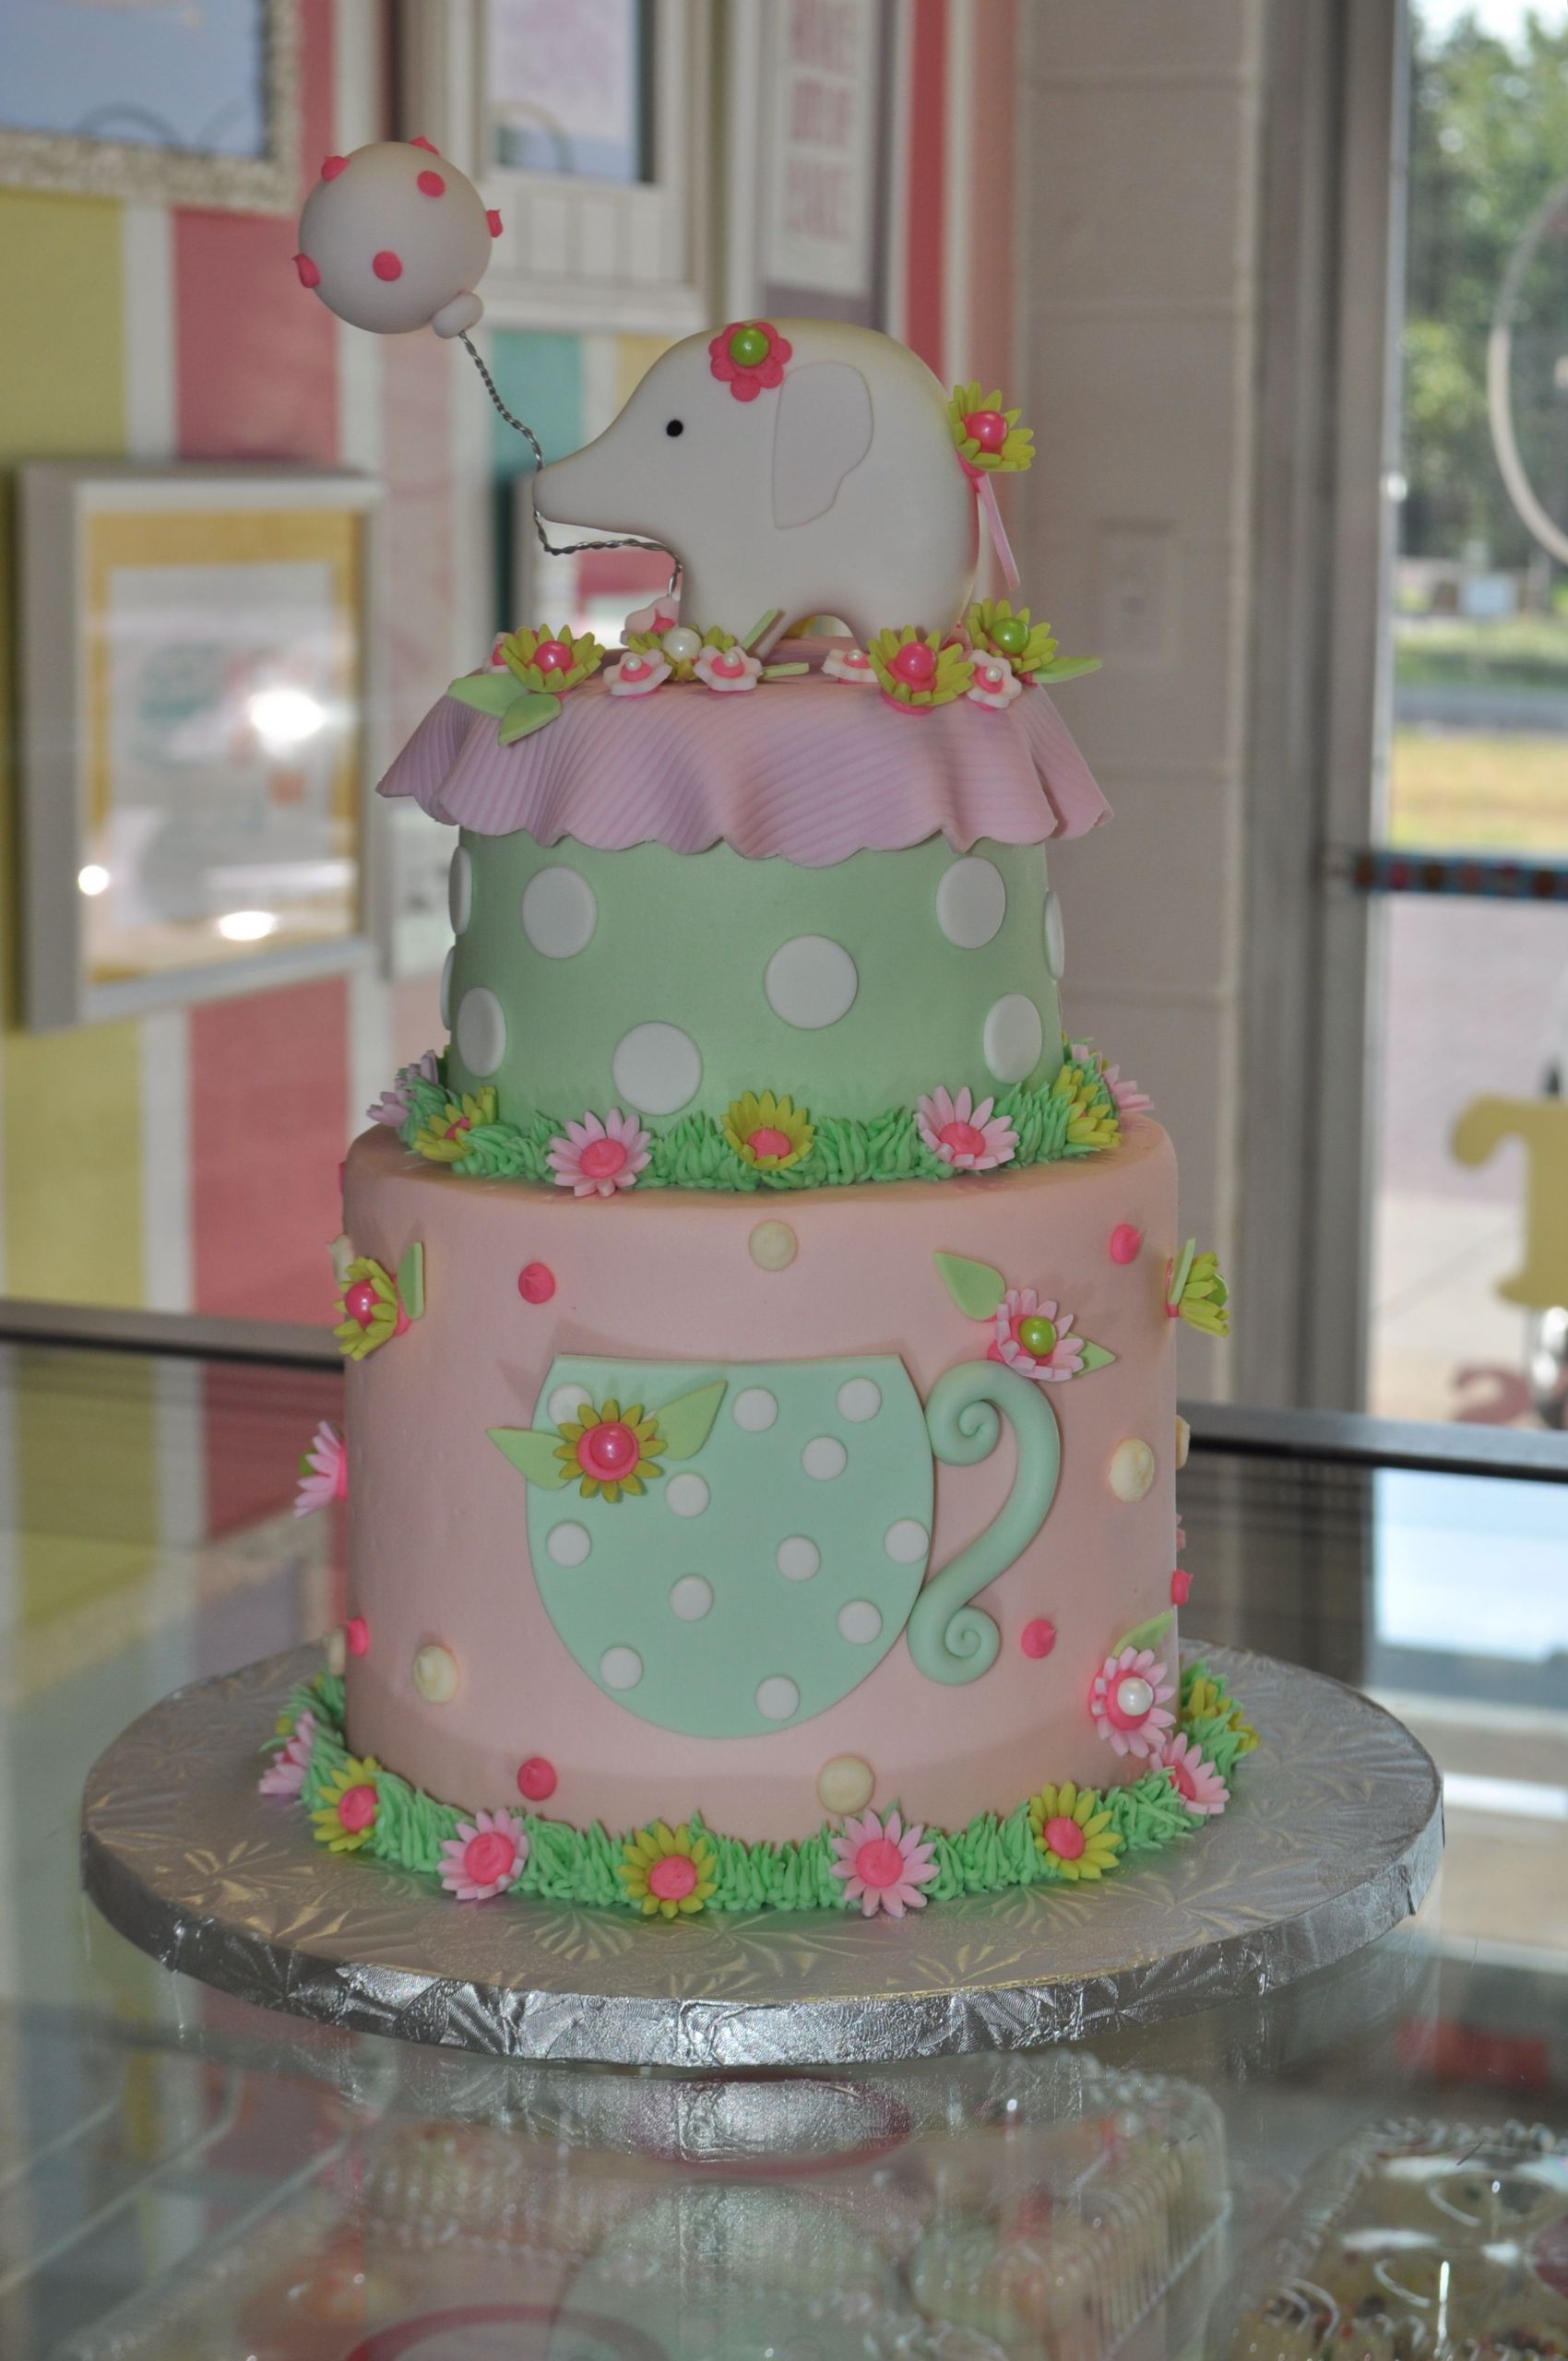 Tea Party Baby Shower Cake
 Elephant Tea Party Girly Baby Shower Cake Pink and Green